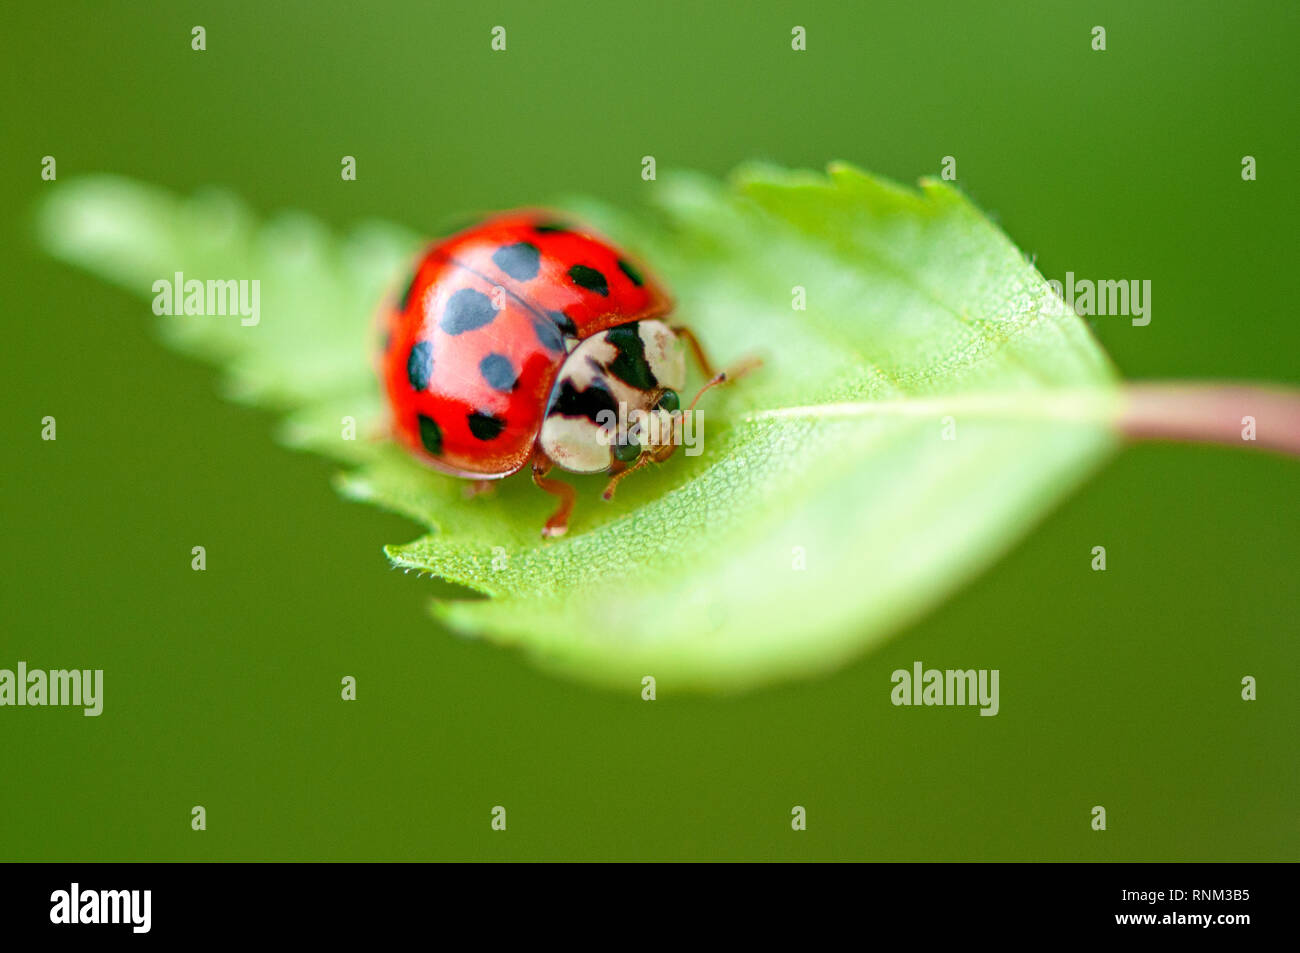 Close-up image of Harmonia axyridis, most commonly known as the harlequin ladybird, multicolored Asian, or simply Asian ladybeetle Stock Photo